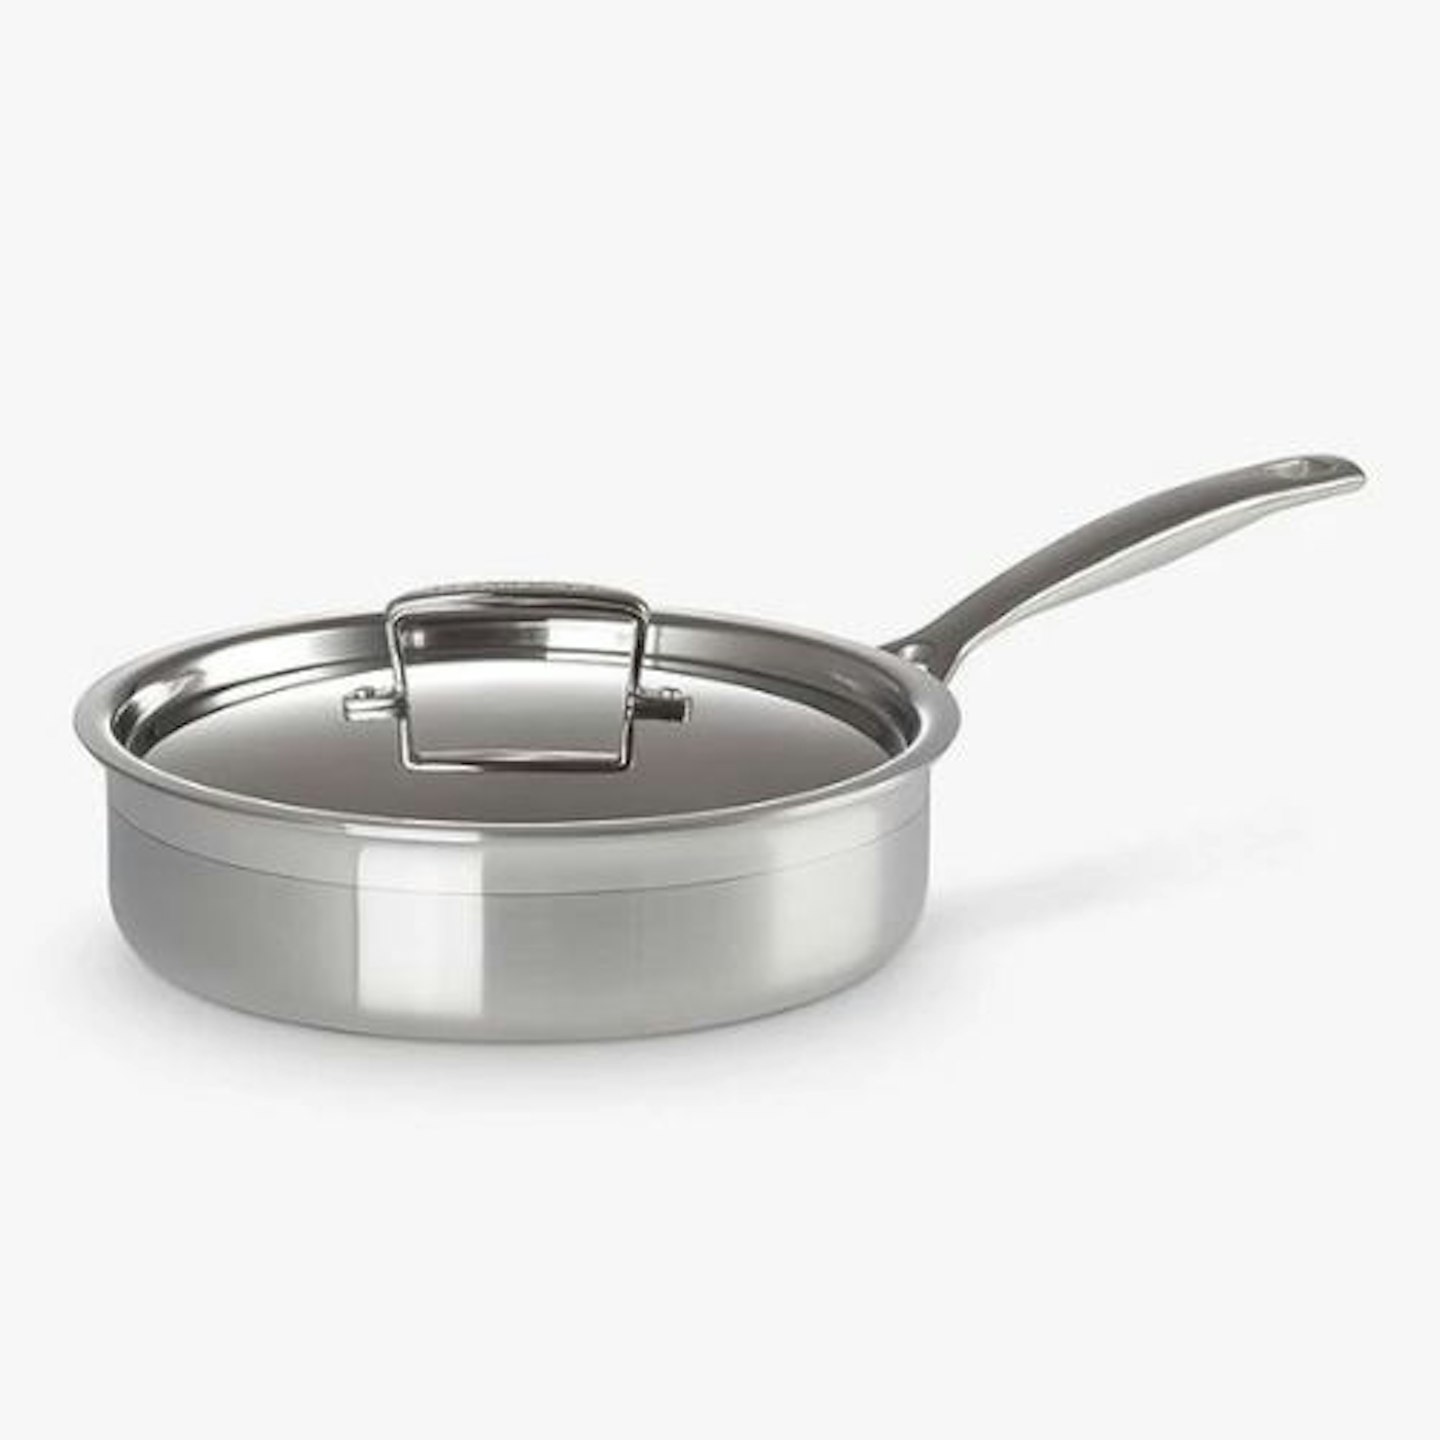 Le Creuset 3-Ply Stainless Steel Sauté Pan with Lid, 24cm